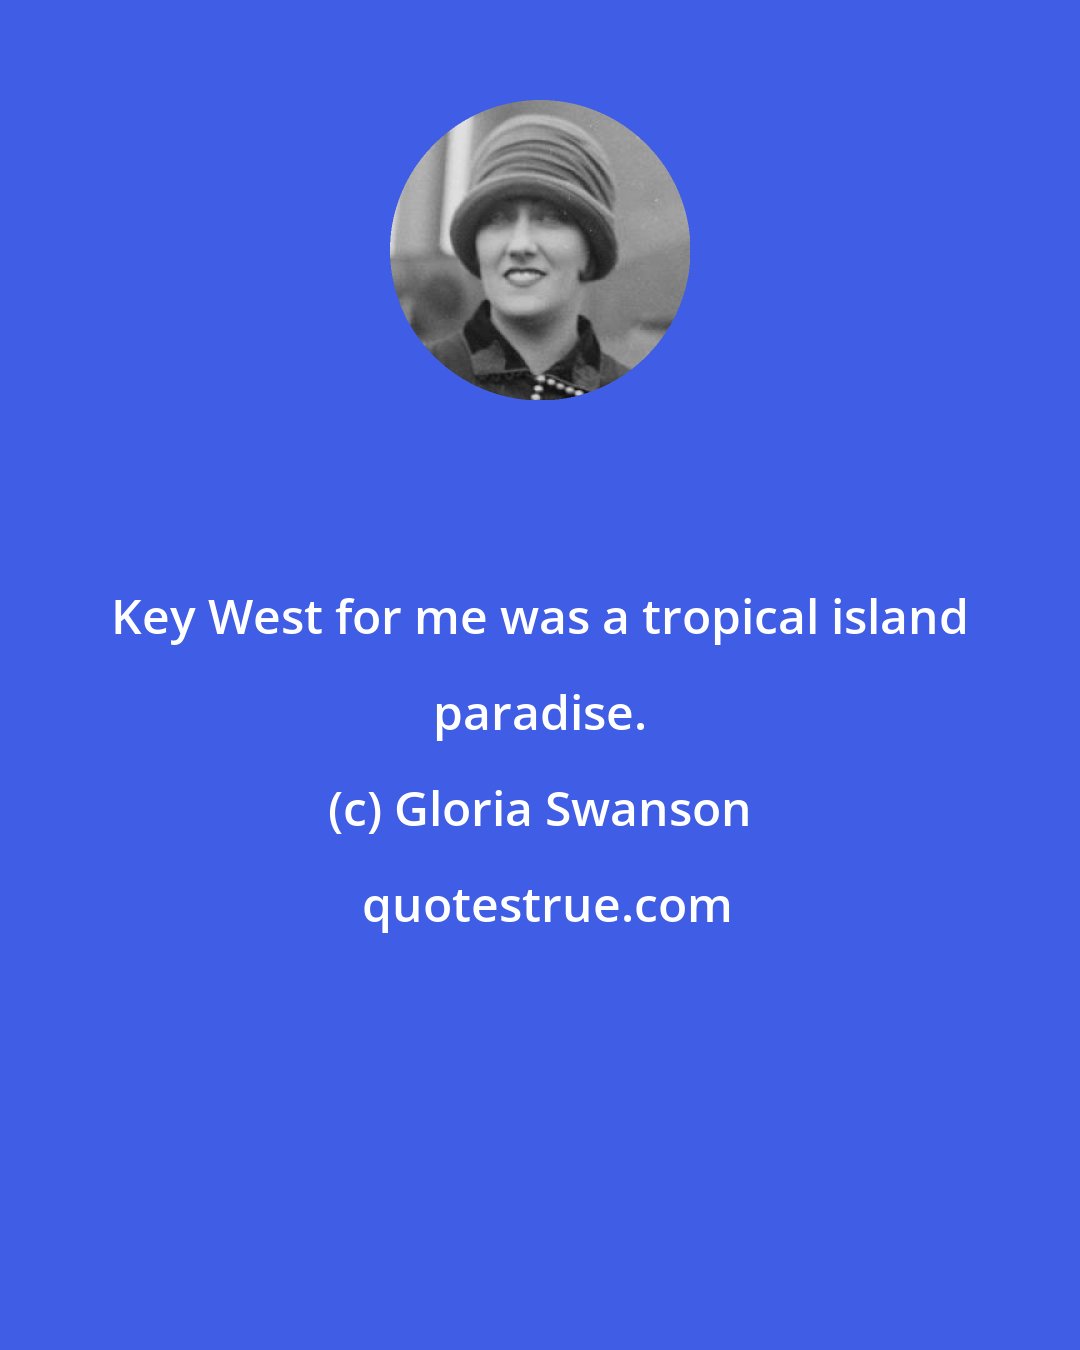 Gloria Swanson: Key West for me was a tropical island paradise.